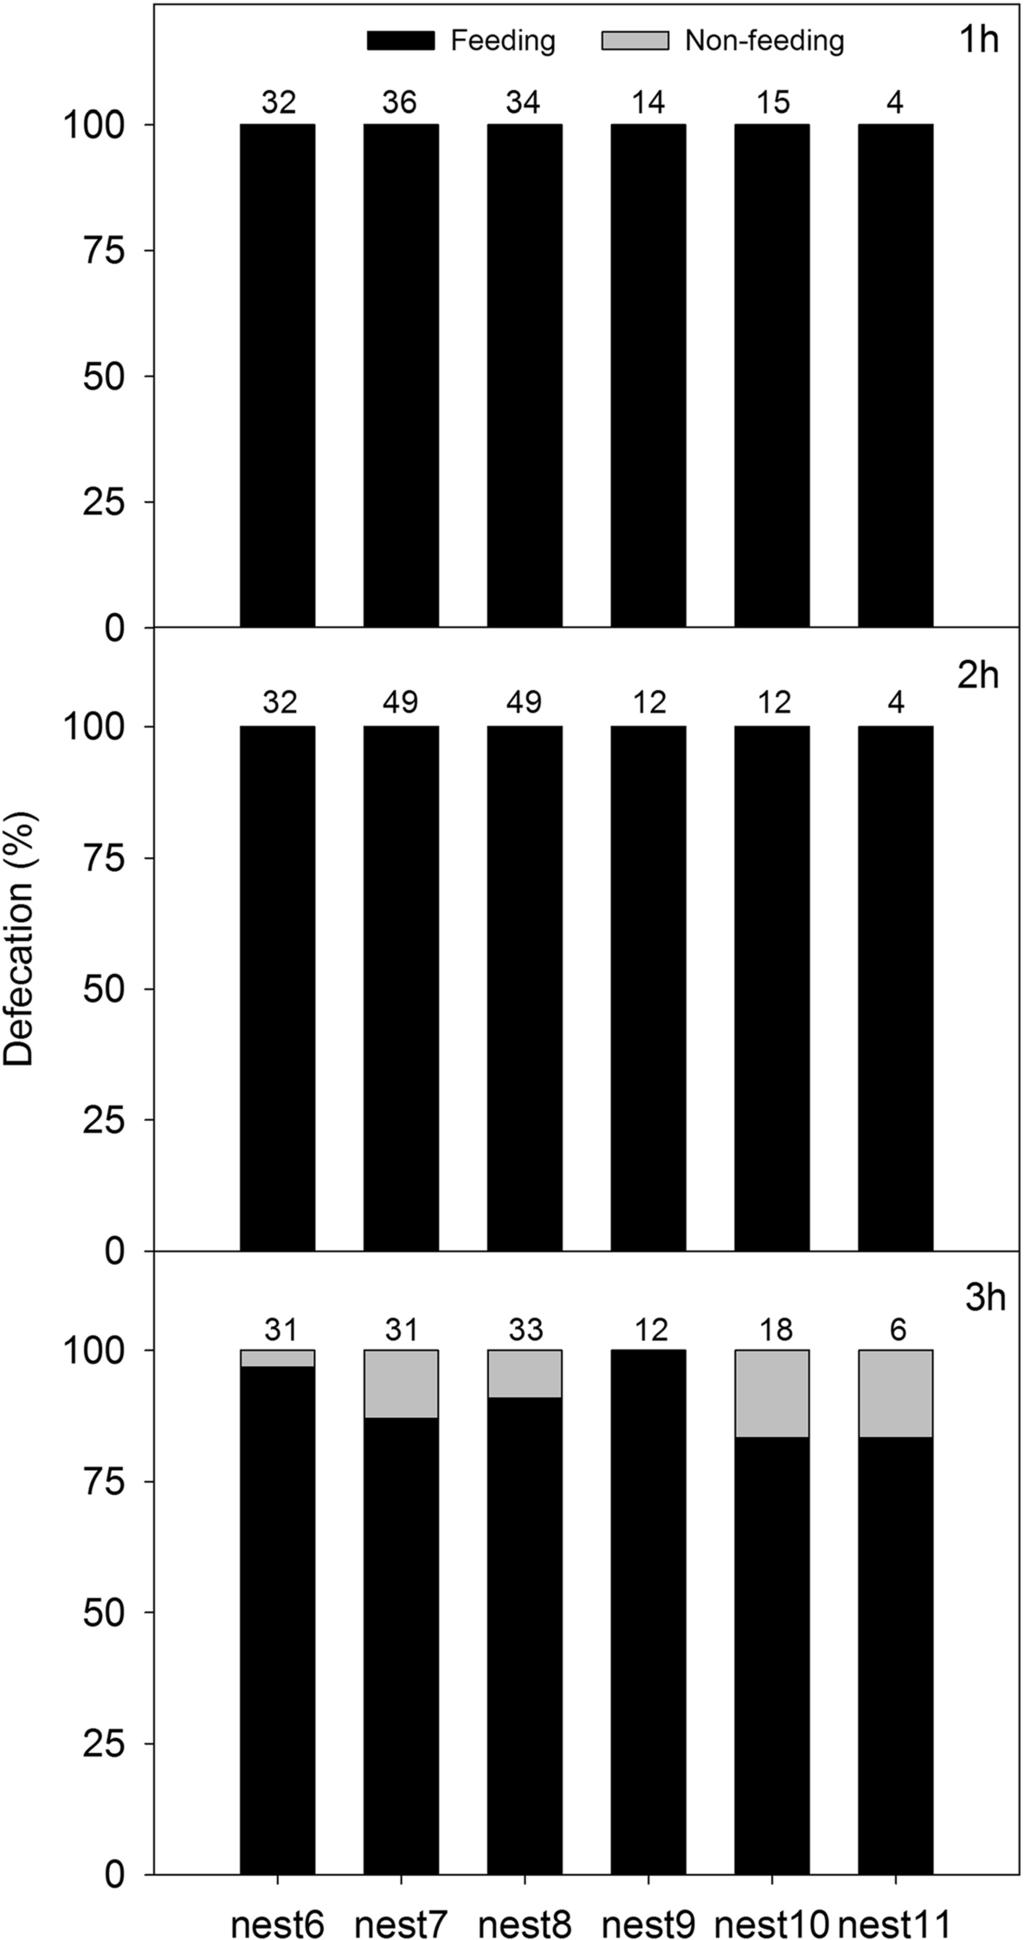 Quan et al. Frontiers in Zoology (2015) 12:21 Page 5 of 7 Fig. 3 In the laboratory experiments, the percentage of fecal sacs defecated during feeding (black portion of bar).